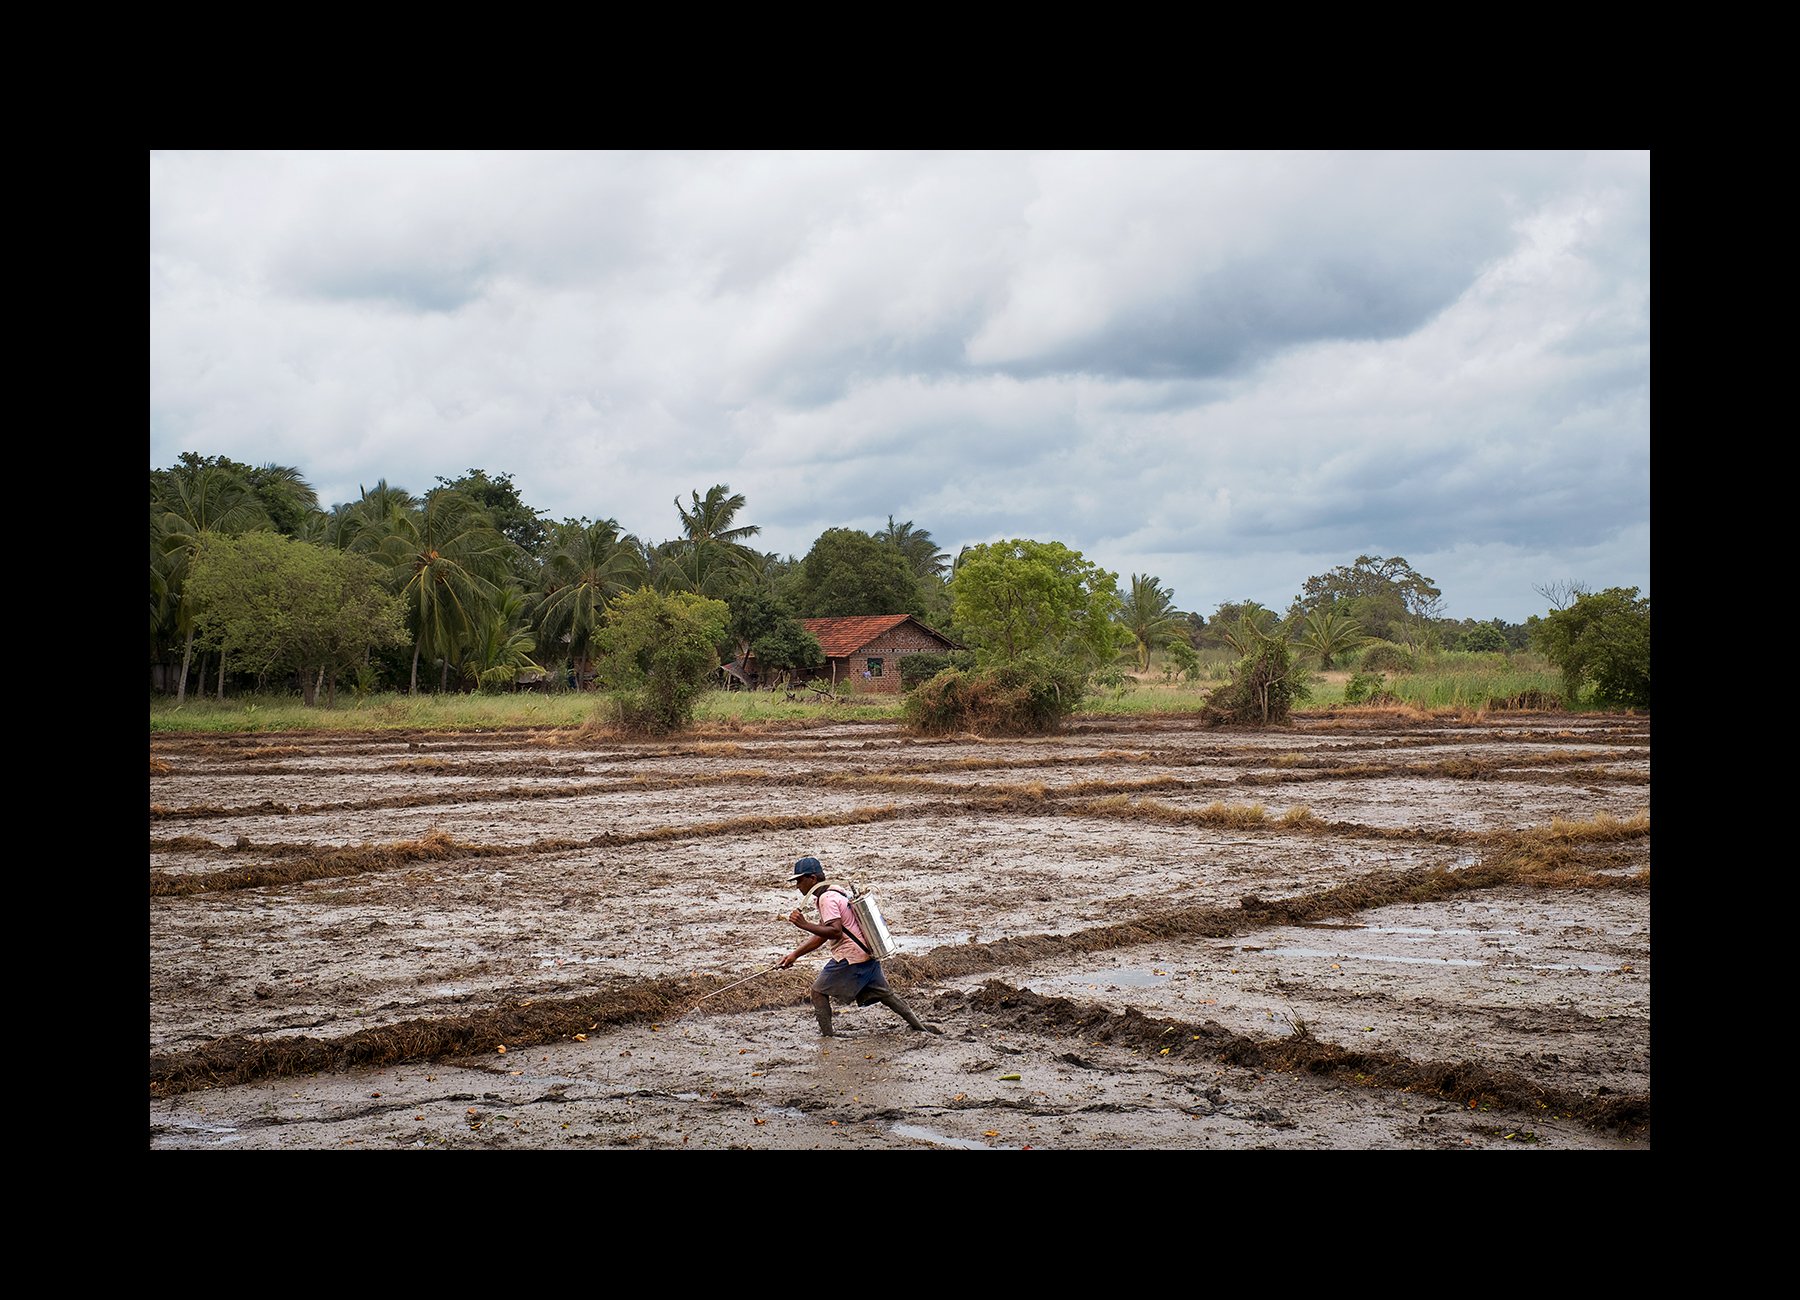  A farmer sprays his rice fields with herbicide to prepare them for planting in the village of Kongahanagama, in the North Central Province of Sri Lanka on June 28, 2016. Pesticides are considered one of the primary causes of CKDnT, a disease that af